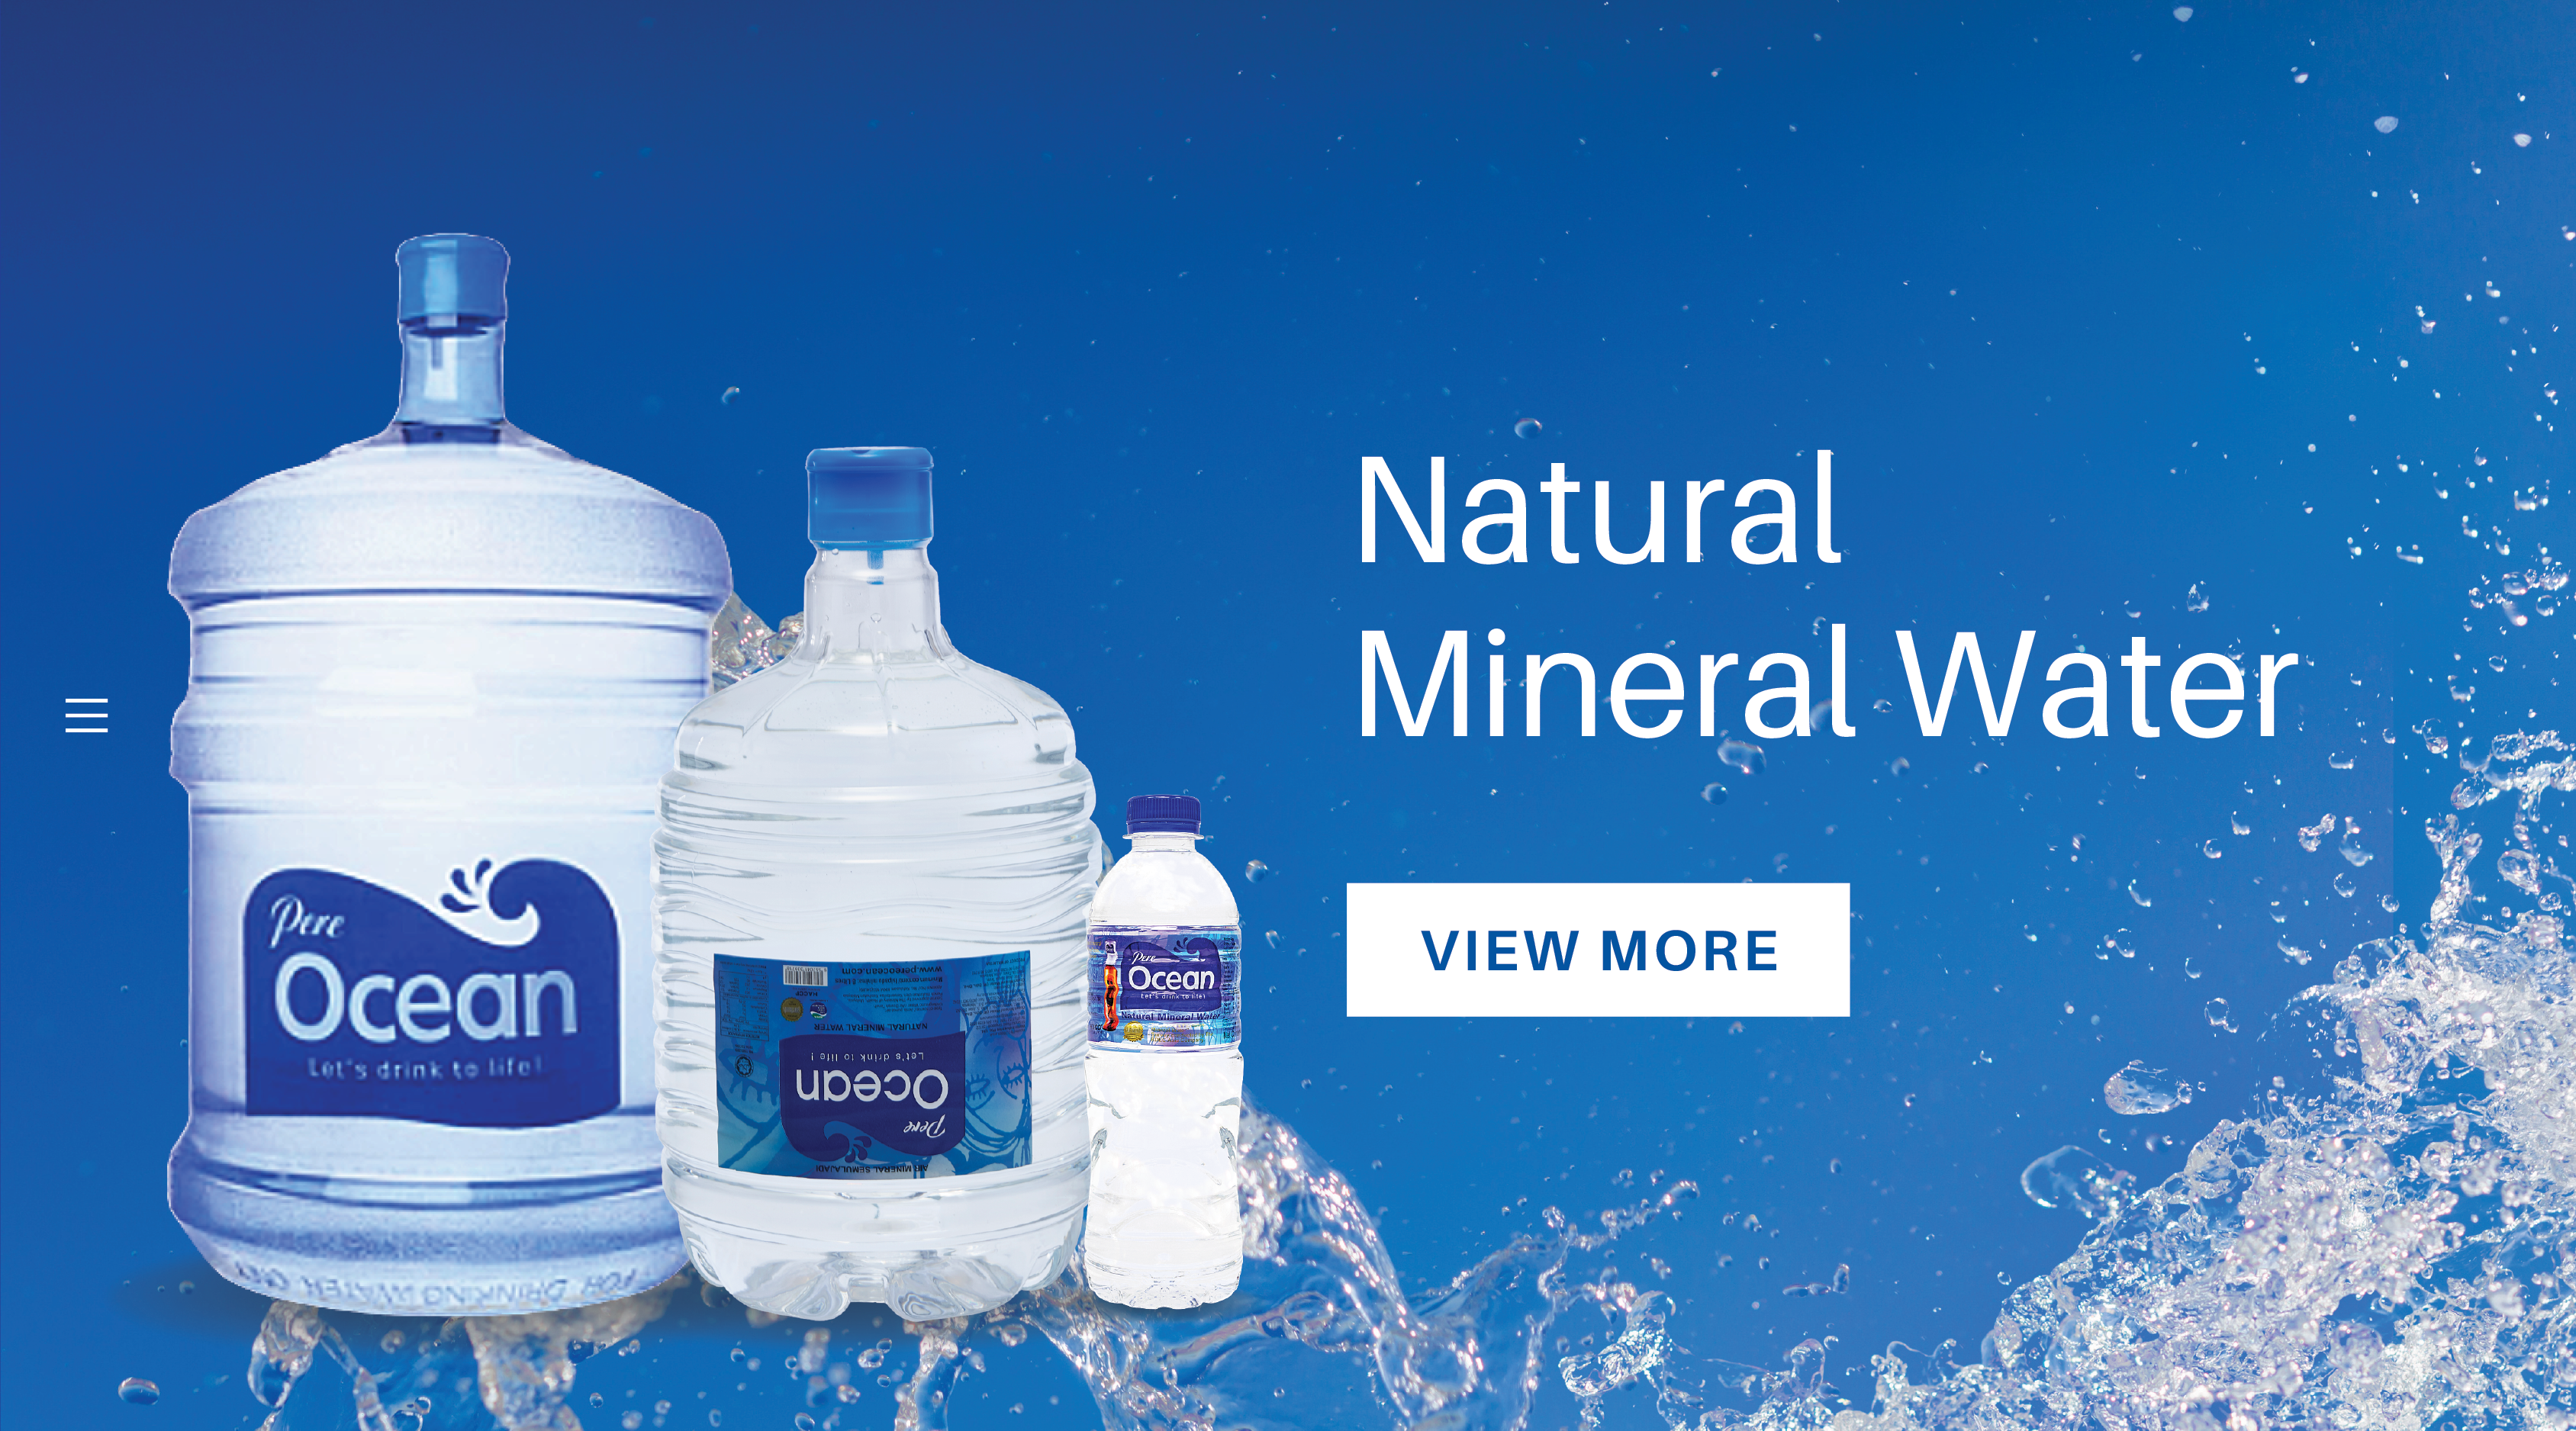 Click to view more Pere Ocean Natural Mineral Water